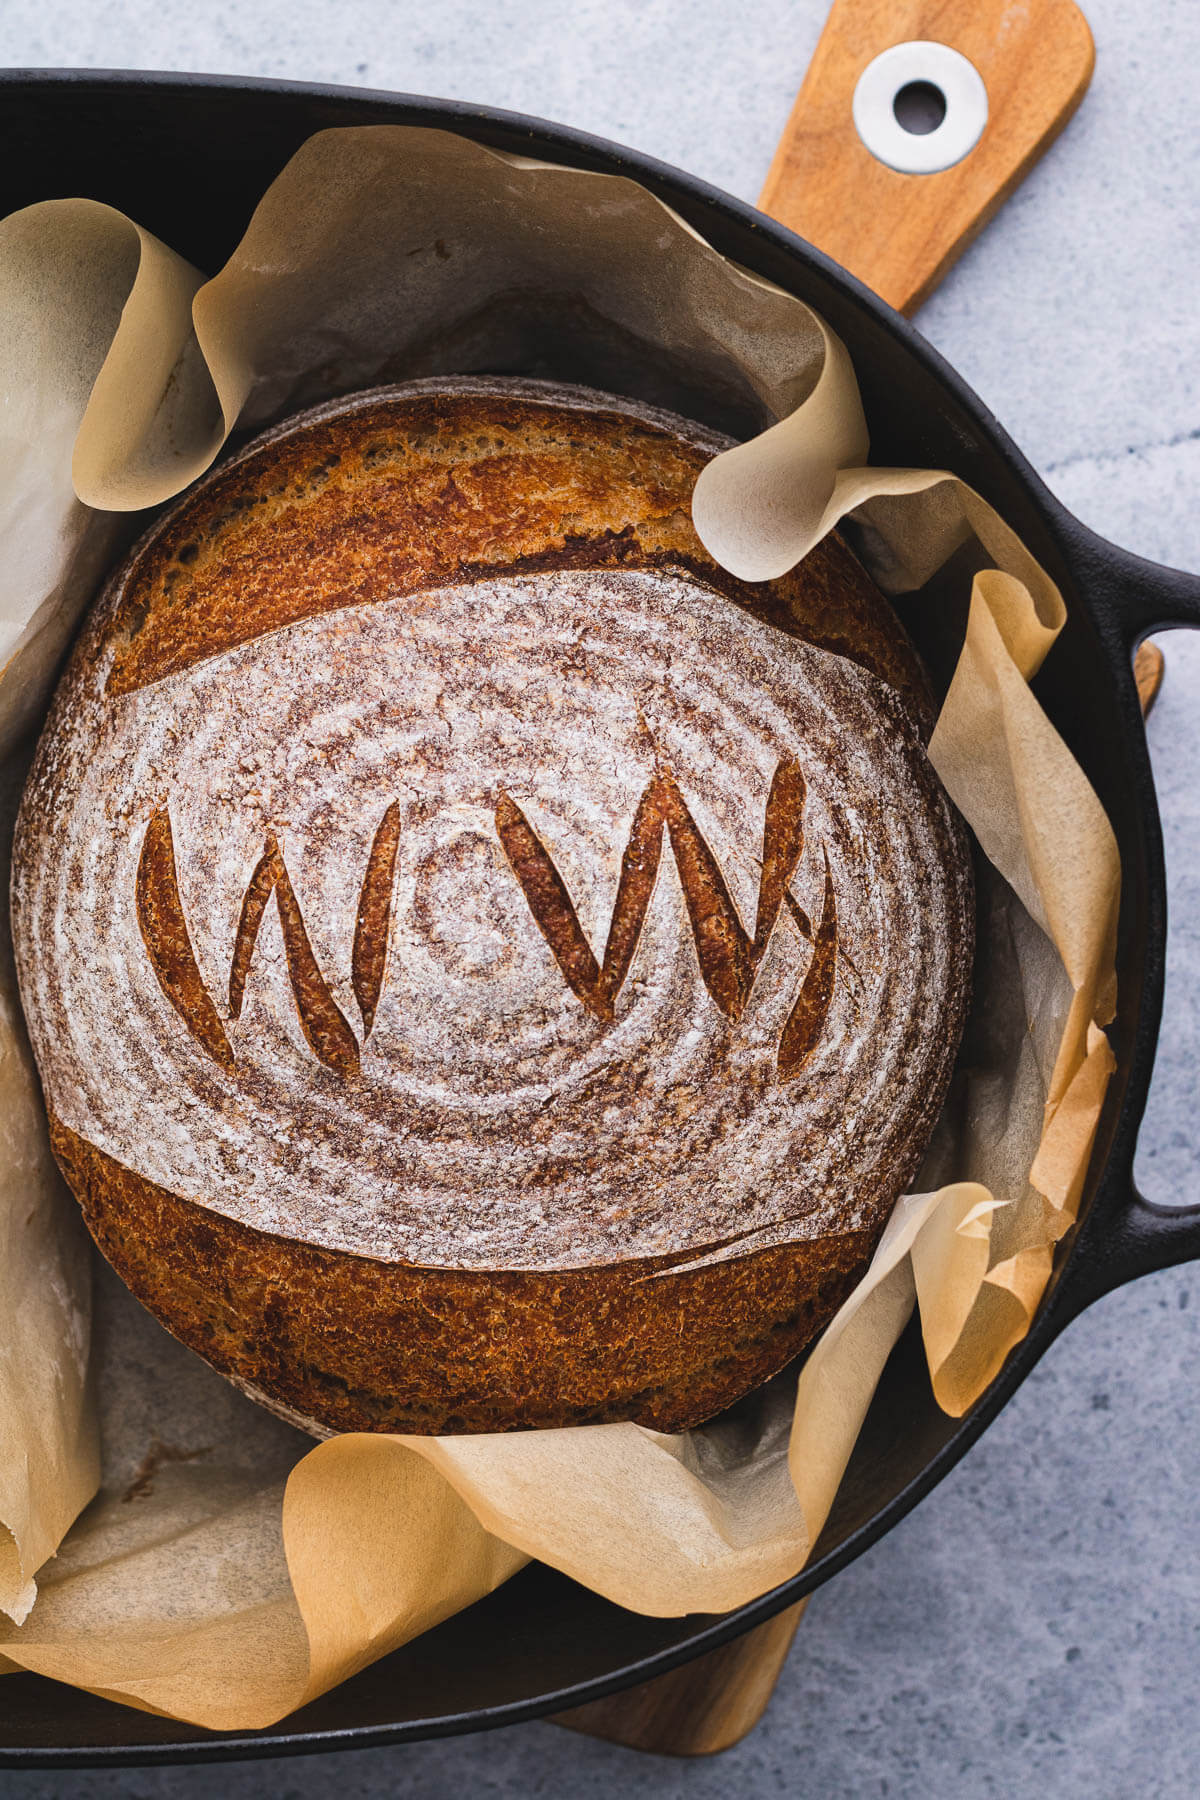 A boule of No Knead Whole Wheat Bread marked with WW scoring pattern in a bed of parchment paper in a black Dutch oven.